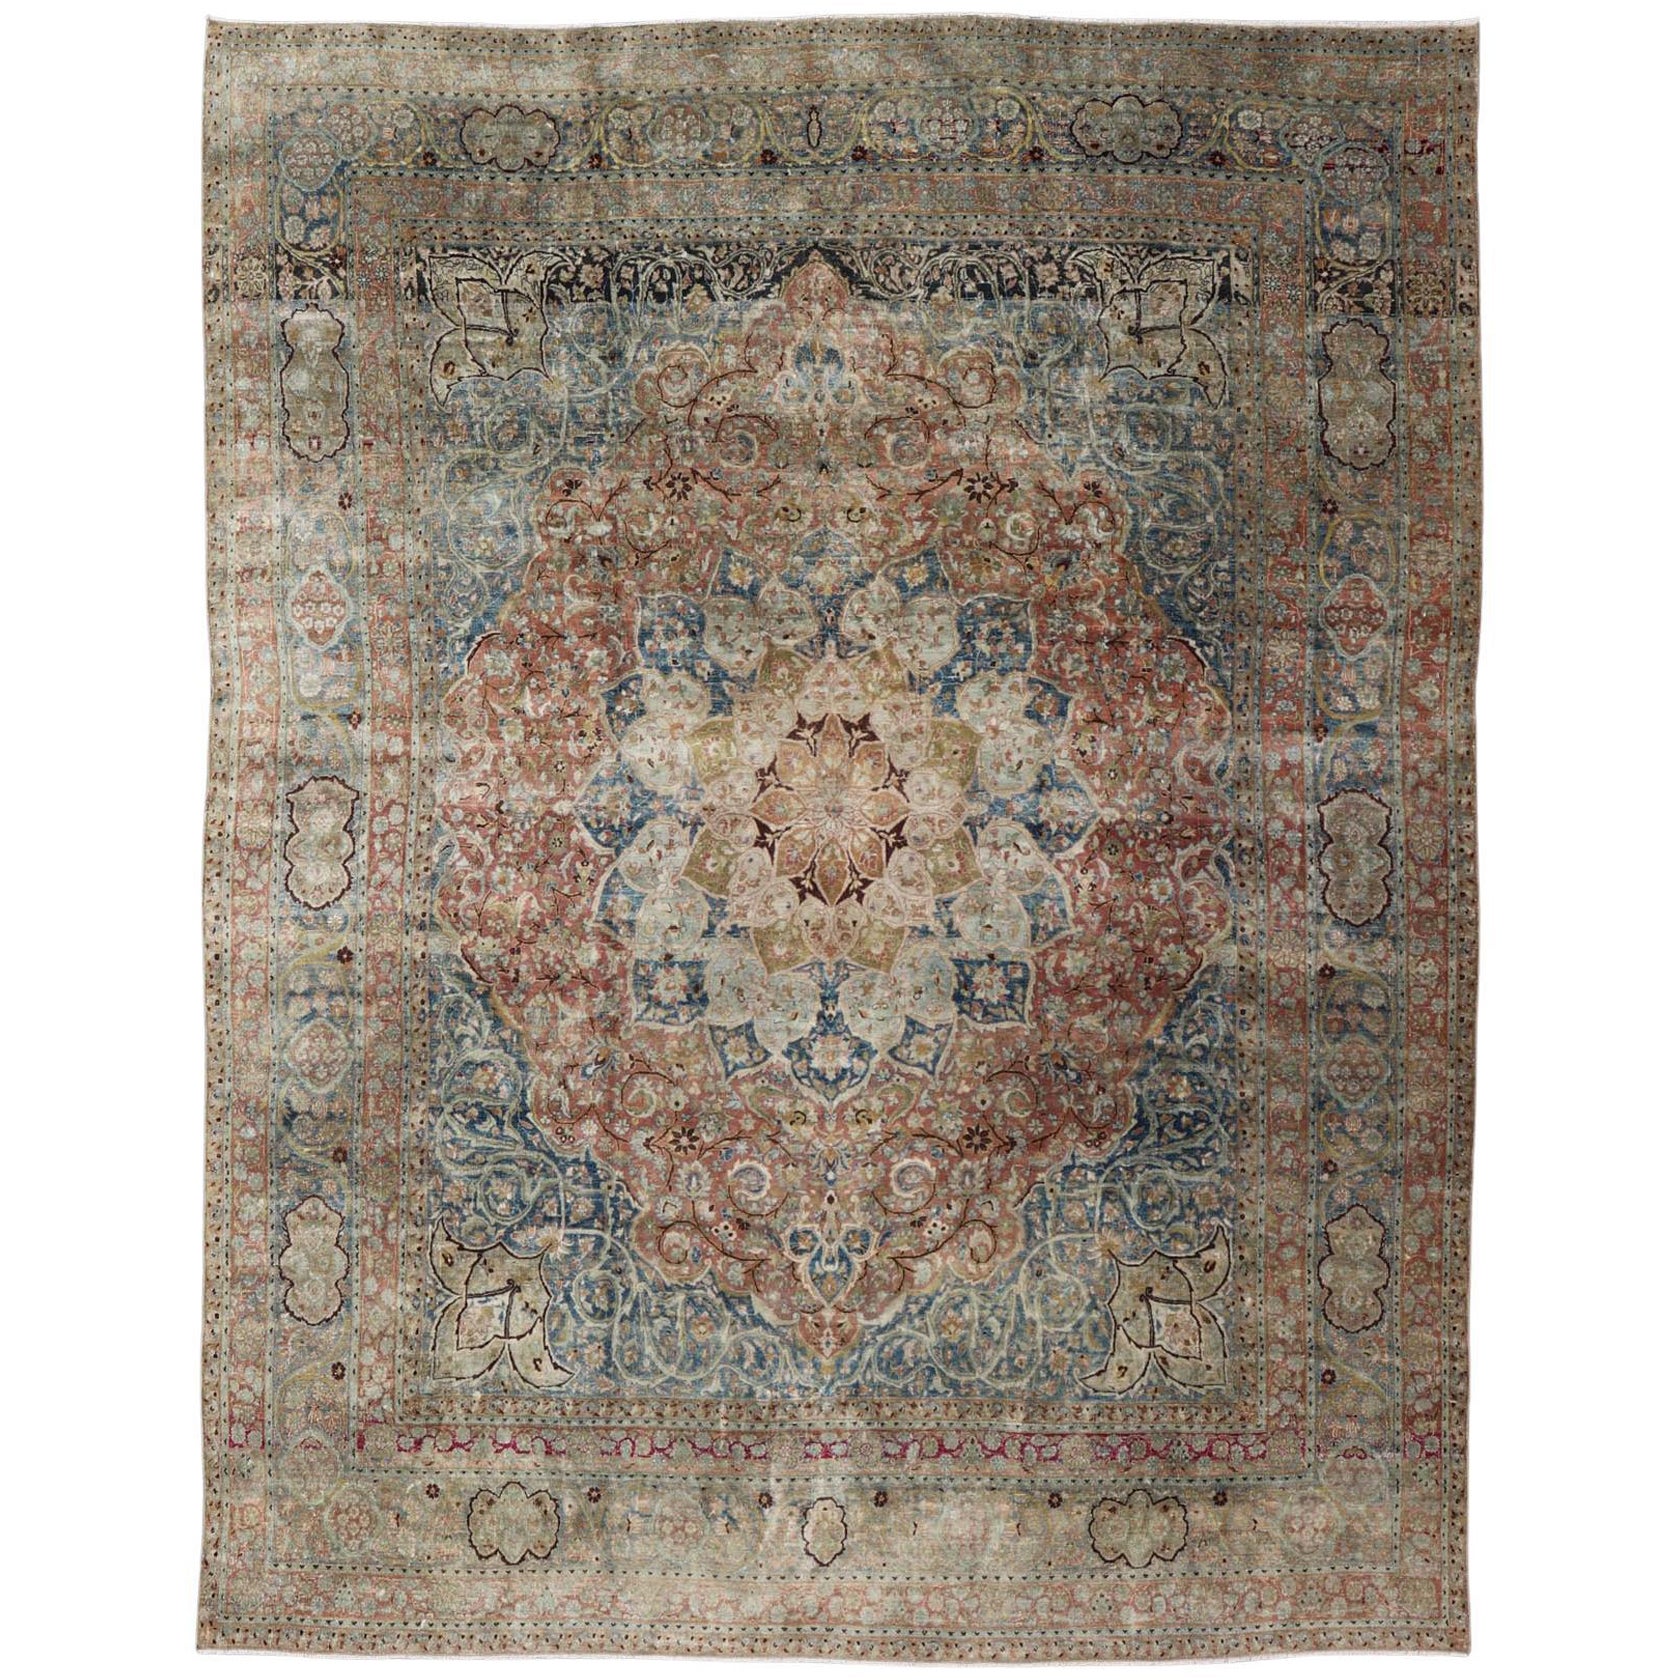 Large Persian Antique Mashad Carpet with Colorful Floral and Medallion Design For Sale